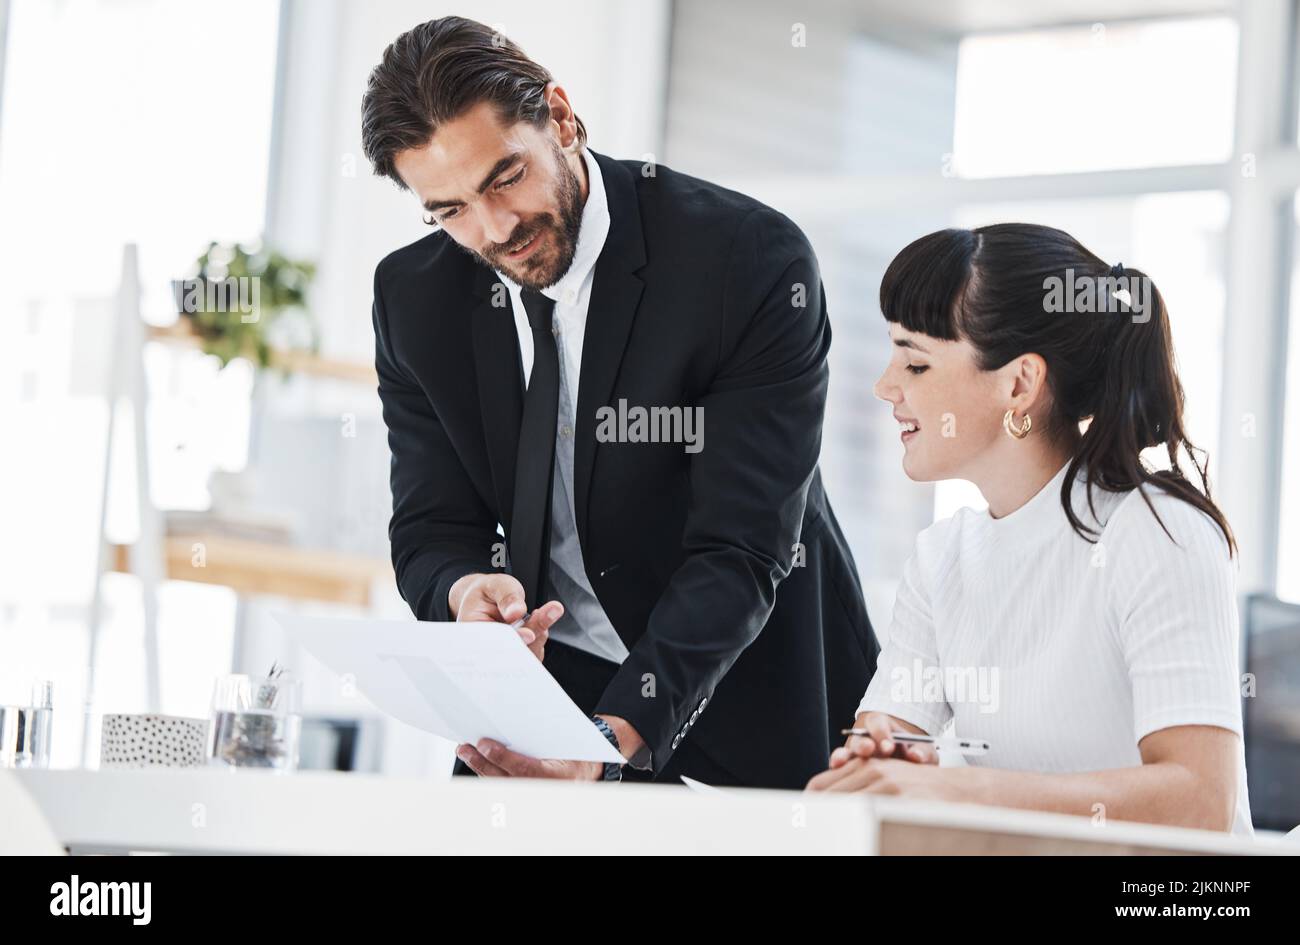 I put a spell on you hi-res stock photography and images - Alamy